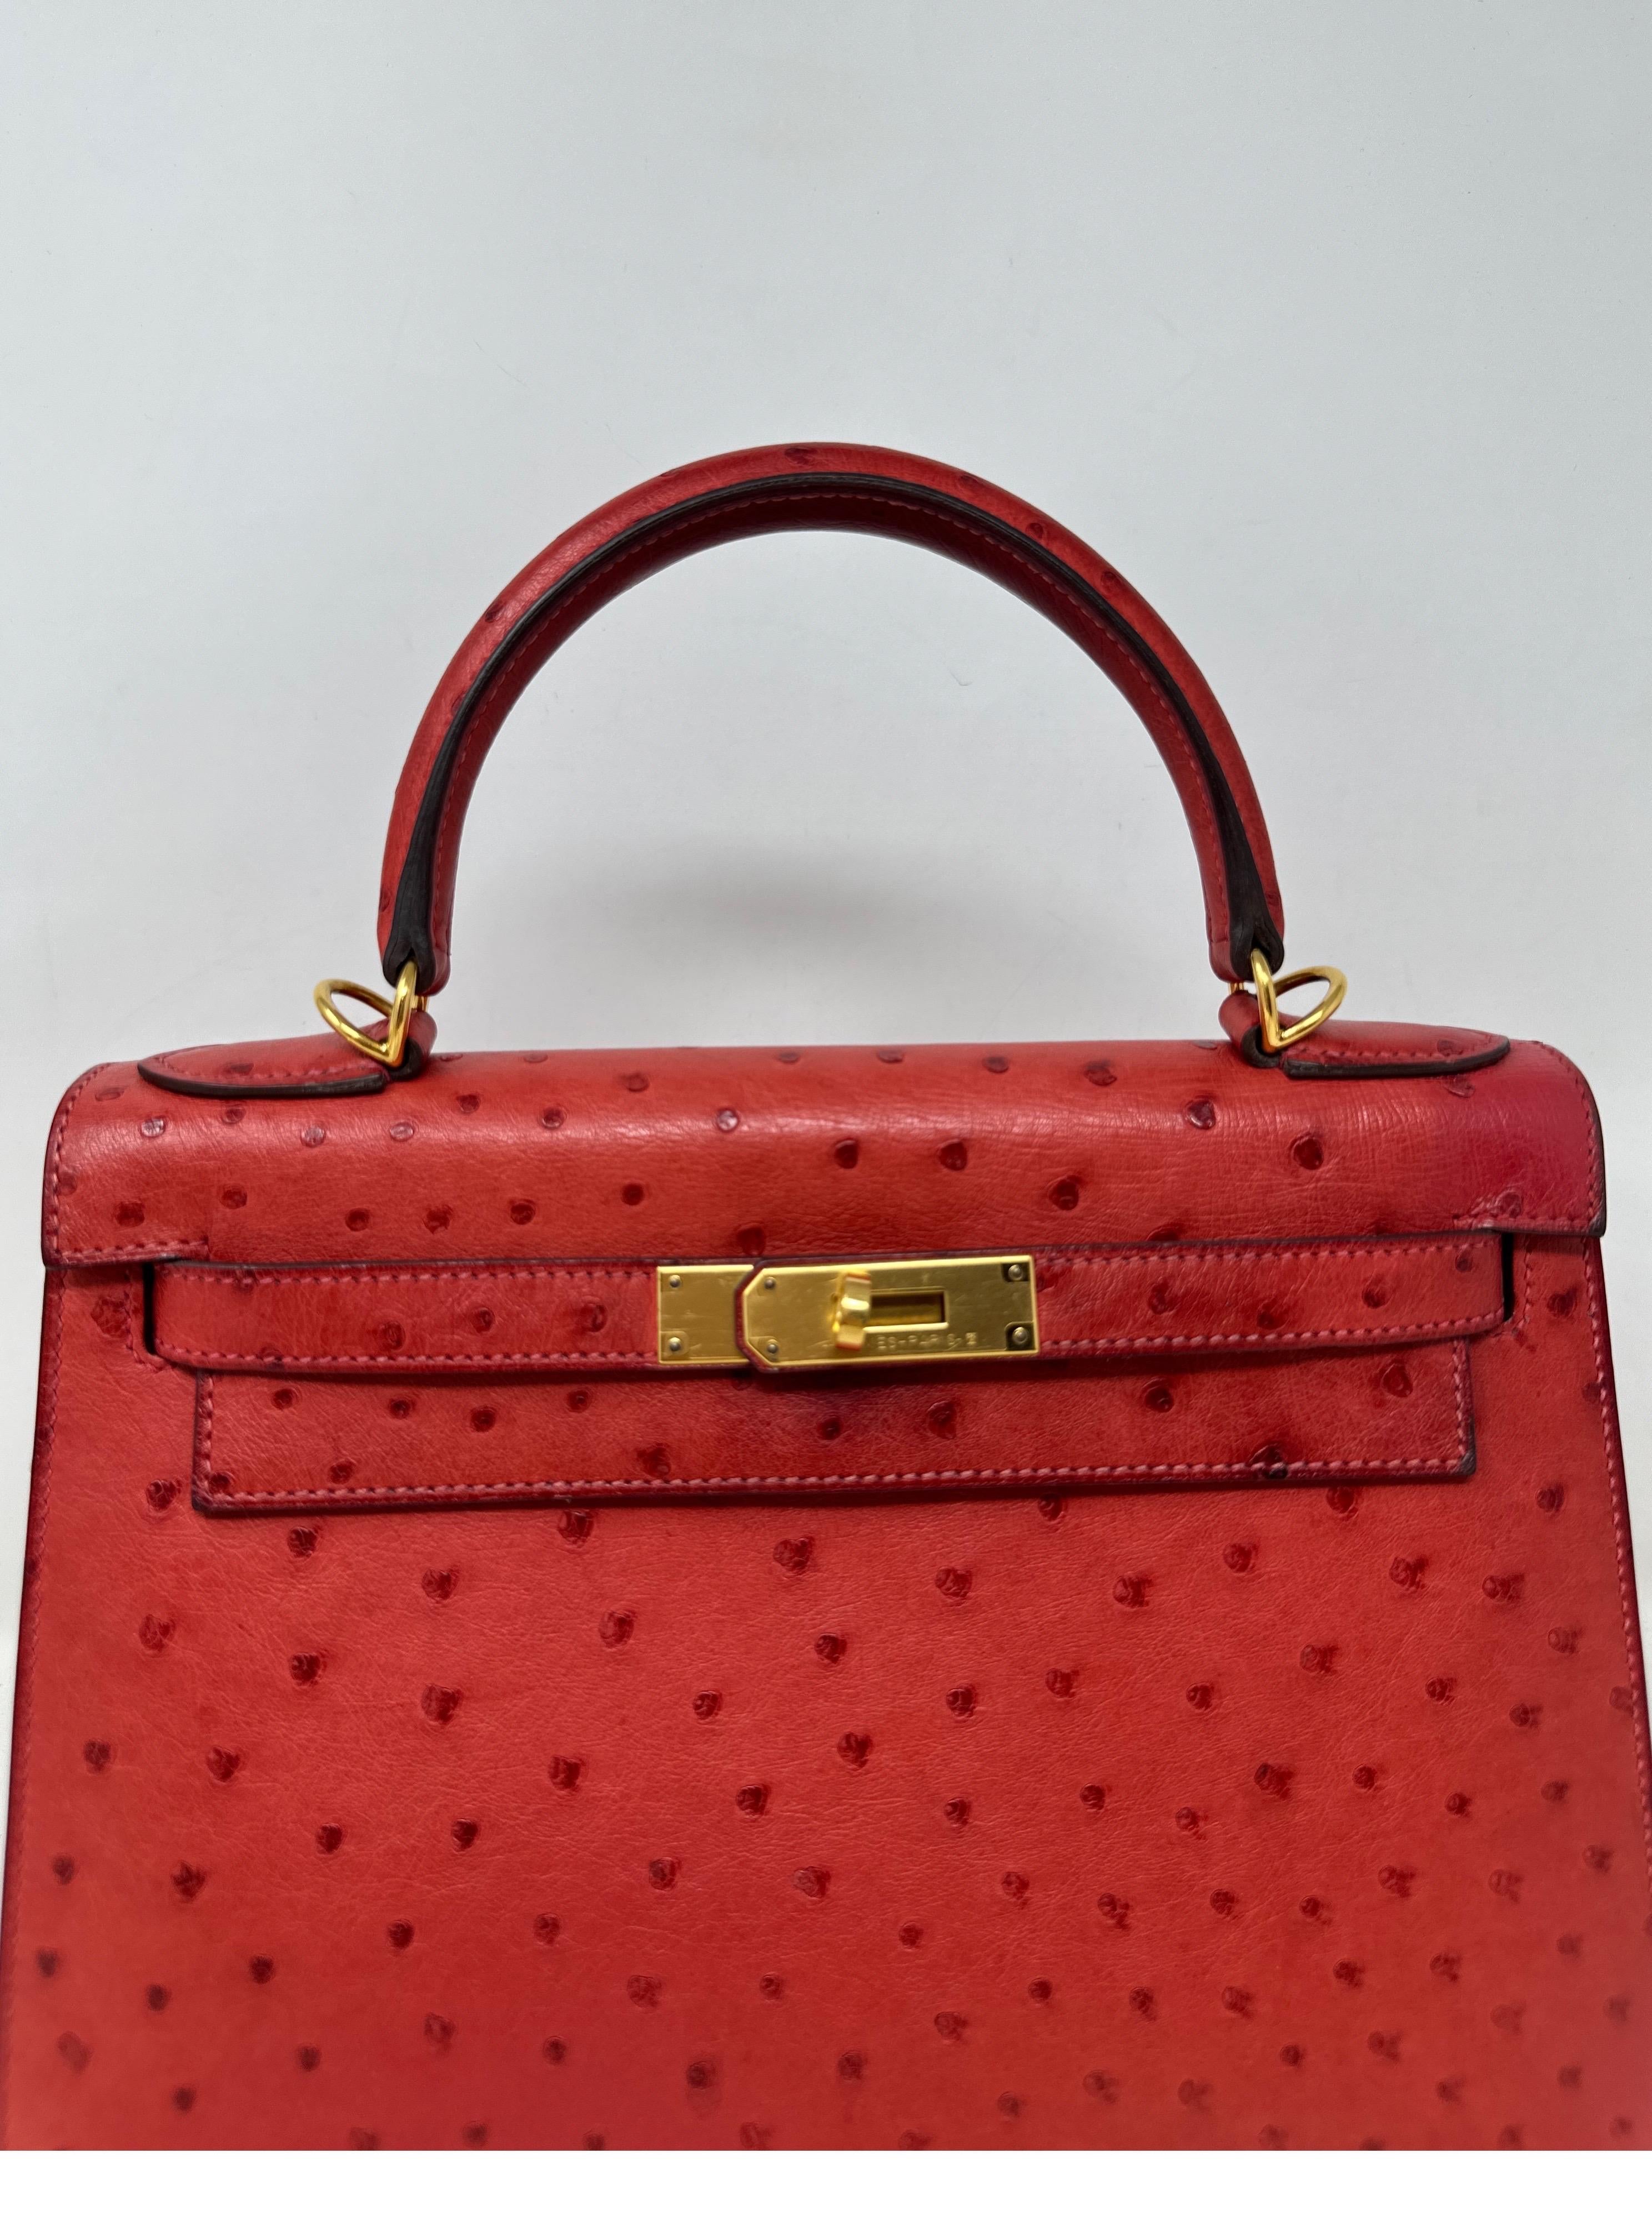 Hermes Ostrich Kelly 28 Bag. Beautiful ostrich leather exotic bag. Rare Kelly in very good condition. Interior clean. Missing clochette and keys. Has strap and dust bag. Pretty red brique color. Gold hardware. Great collector's bag. Guaranteed